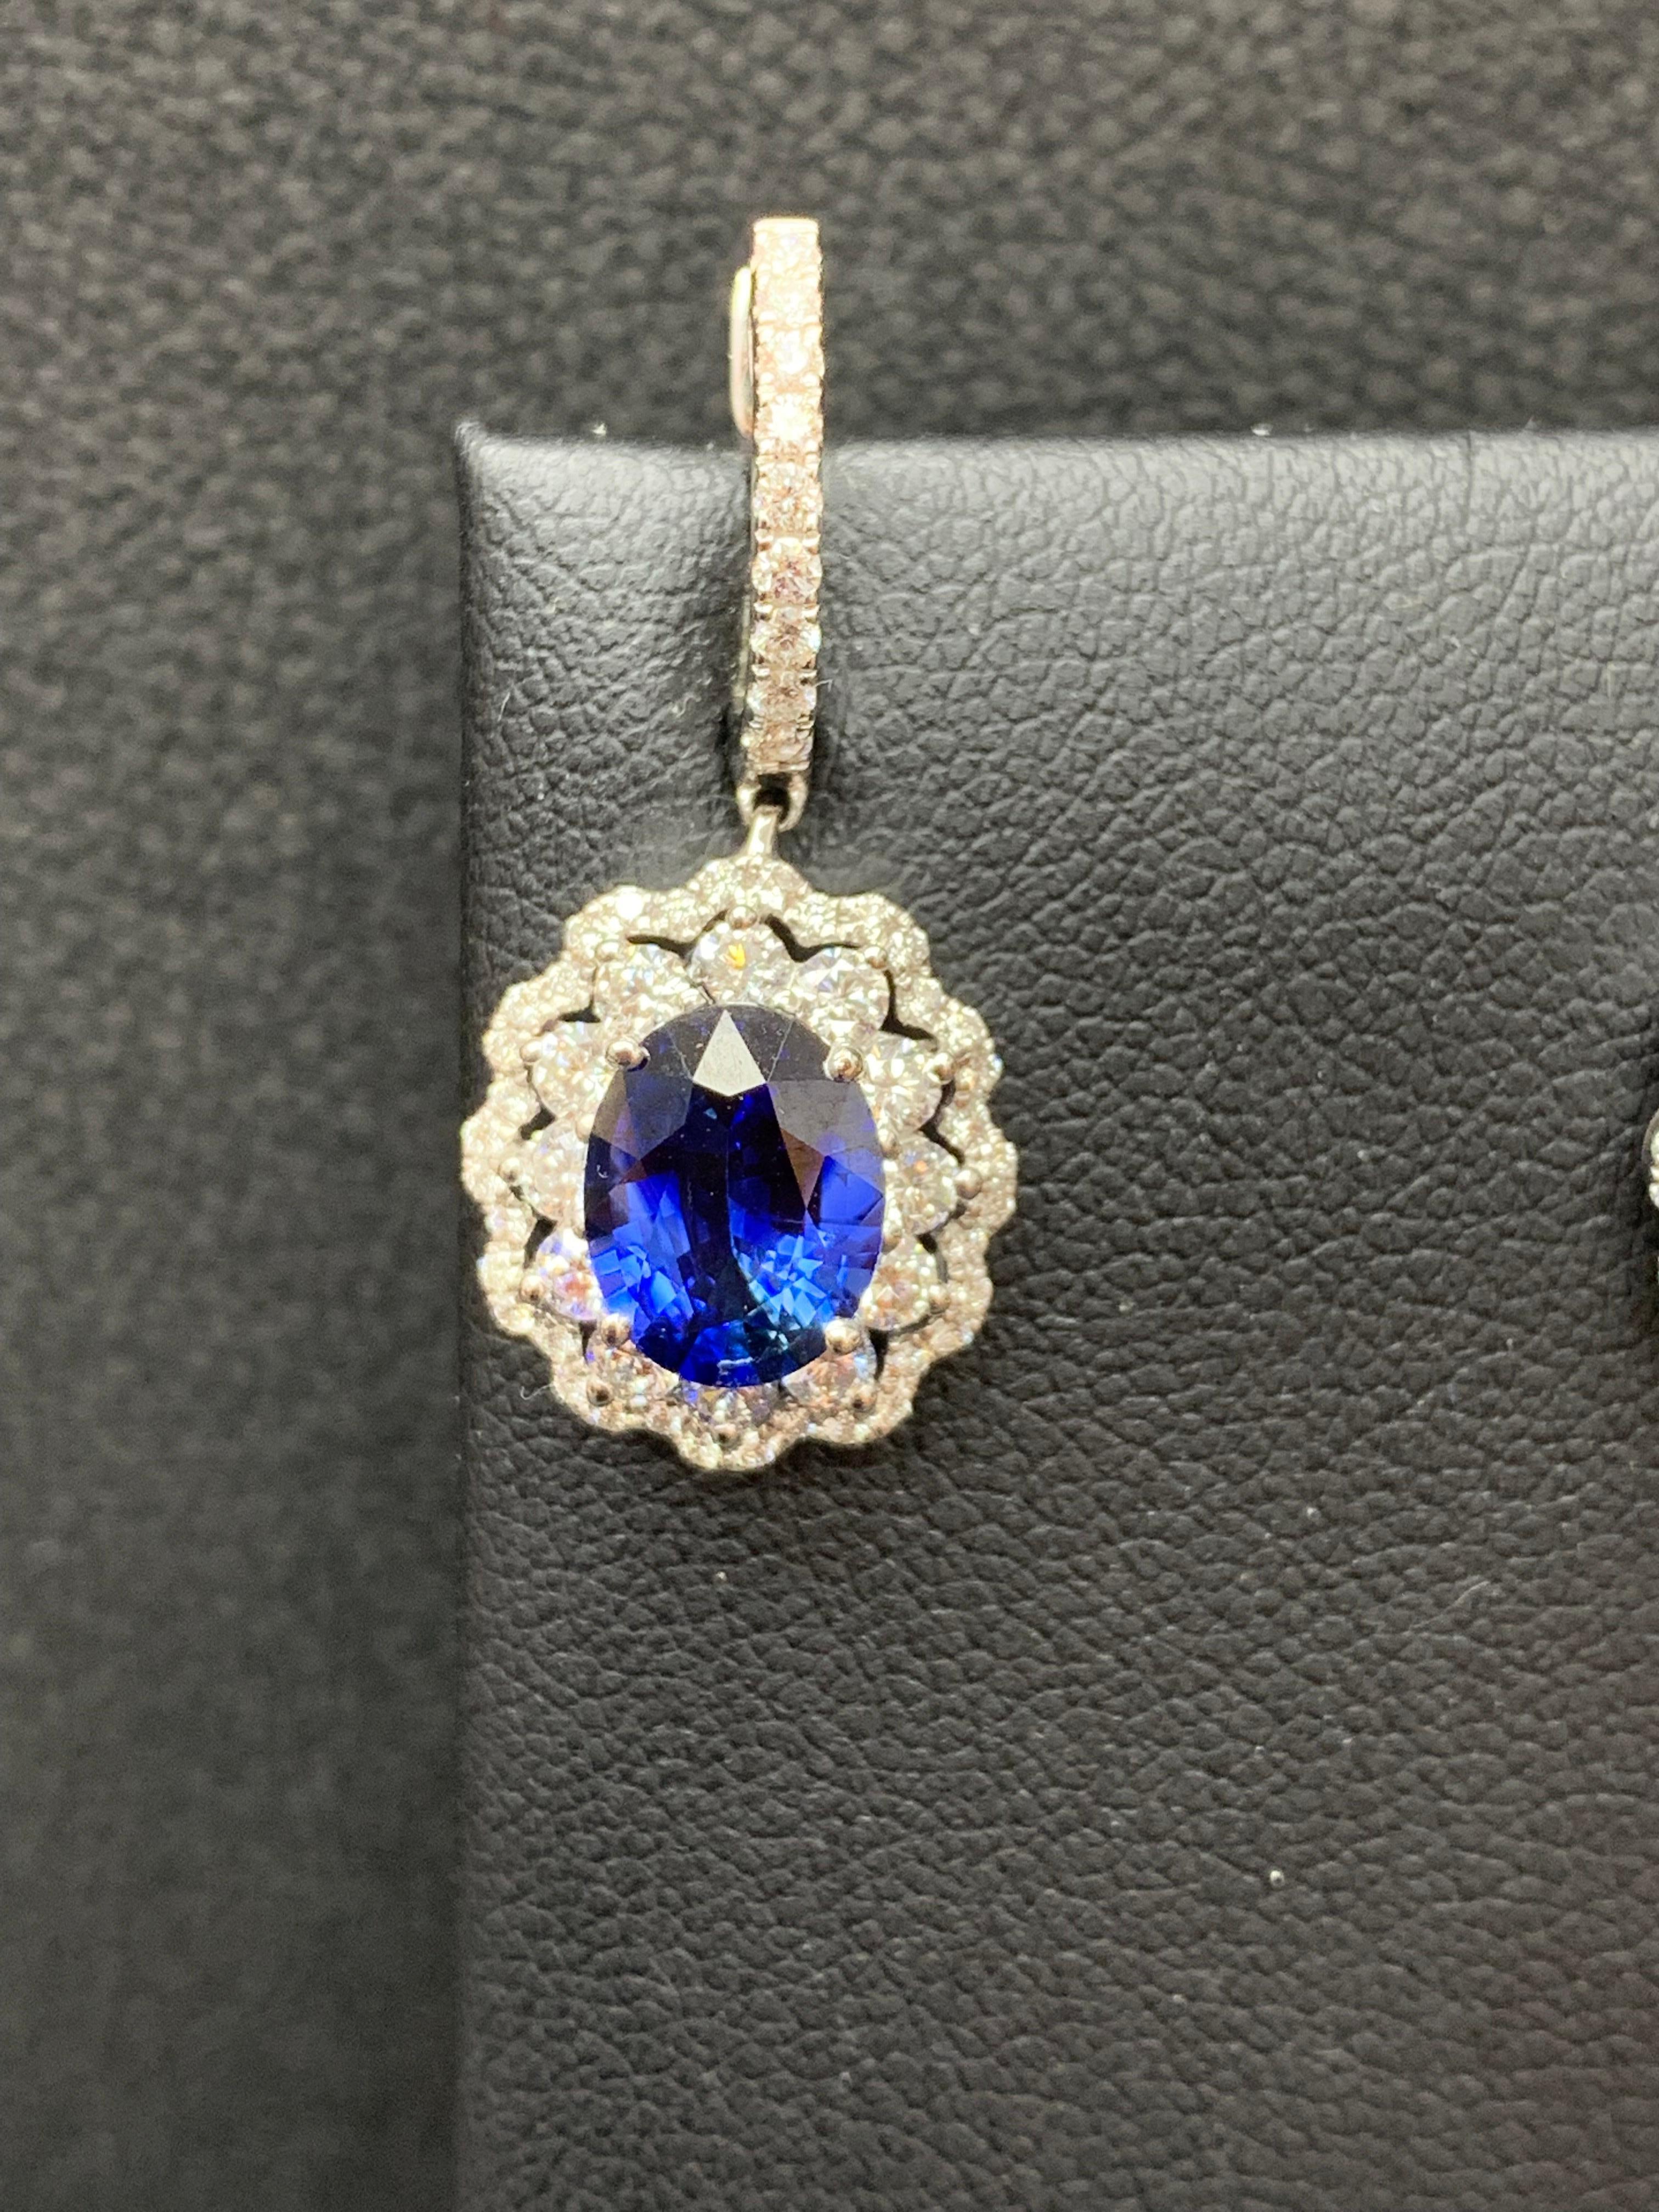 Dangle earrings featuring Oval shape blue sapphires weighing 3.56 carats total, surrounded by two rows of round brilliant diamonds in a flower design. Accent Diamonds weigh 1.54 carats total. Made in 18 karat white gold.